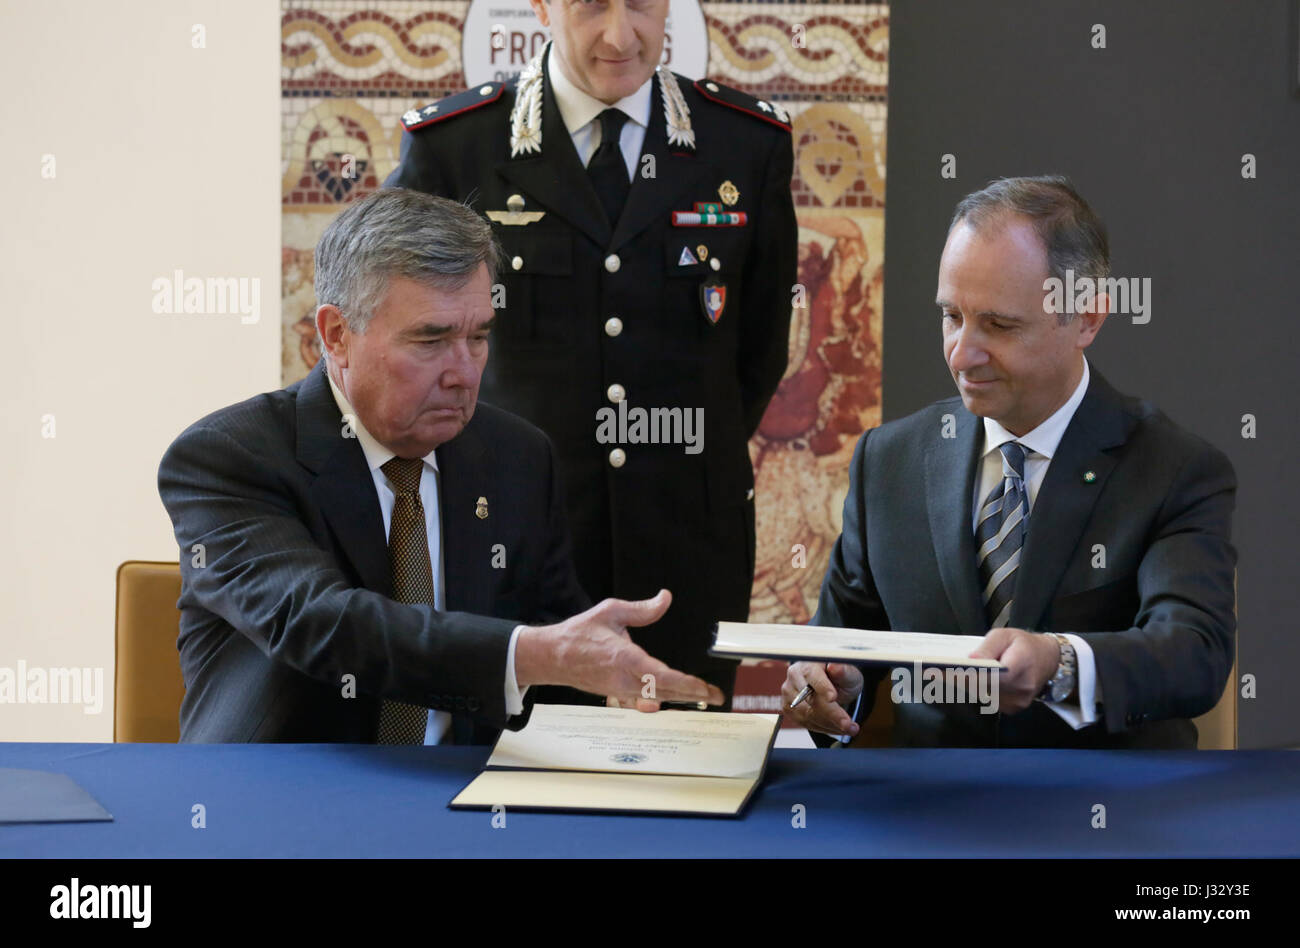 U.S. Customs and Border Protection Commissioner R. Gil Kerlikowske and Italian Ambassador to the United States Ambassador Armando Varricchio swap formal documents during a ceremony repatriating historic artifacts to the government of Italy at the Italian Embassy in Washington, D.C., December 9, 2016. U.S. Customs and Border Protection Photo by Glenn Fawcett Stock Photo